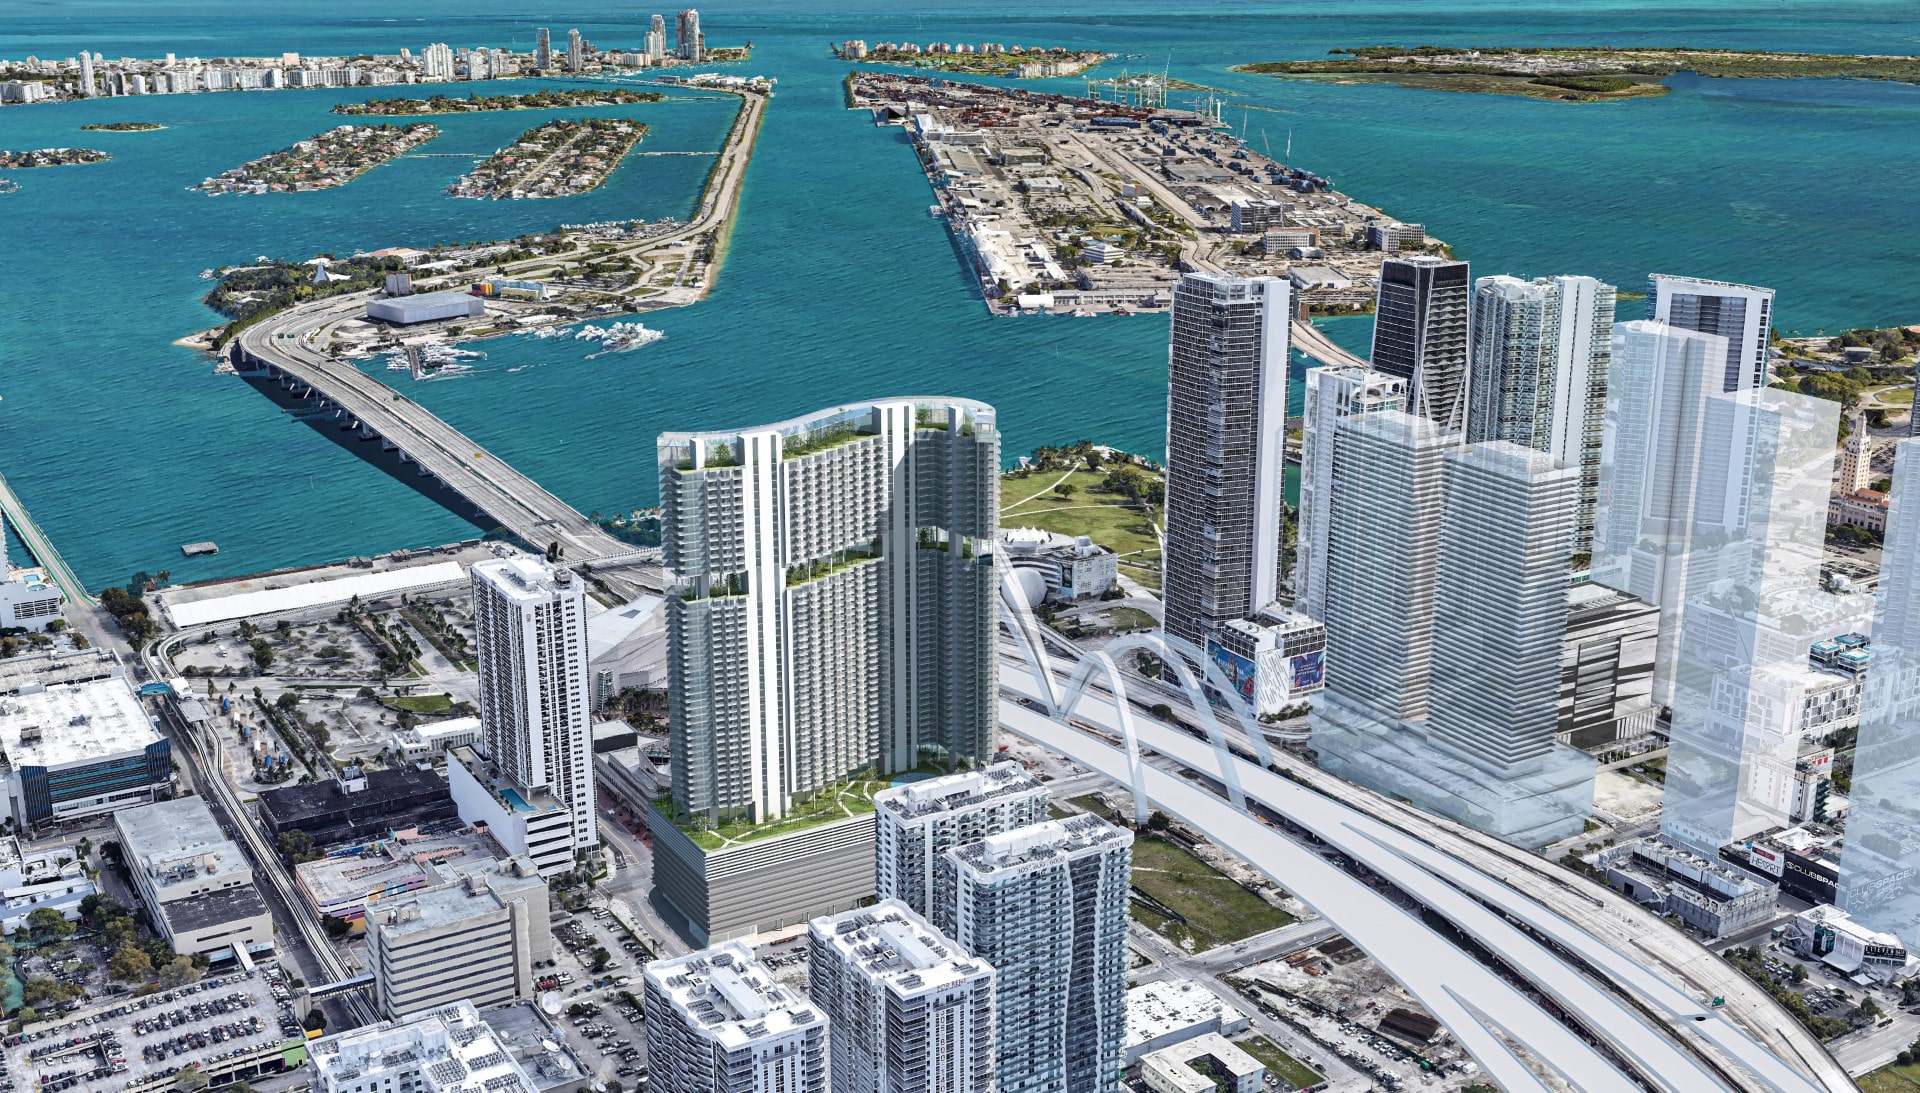 S-shaped Proposed Construction Tower in Miami